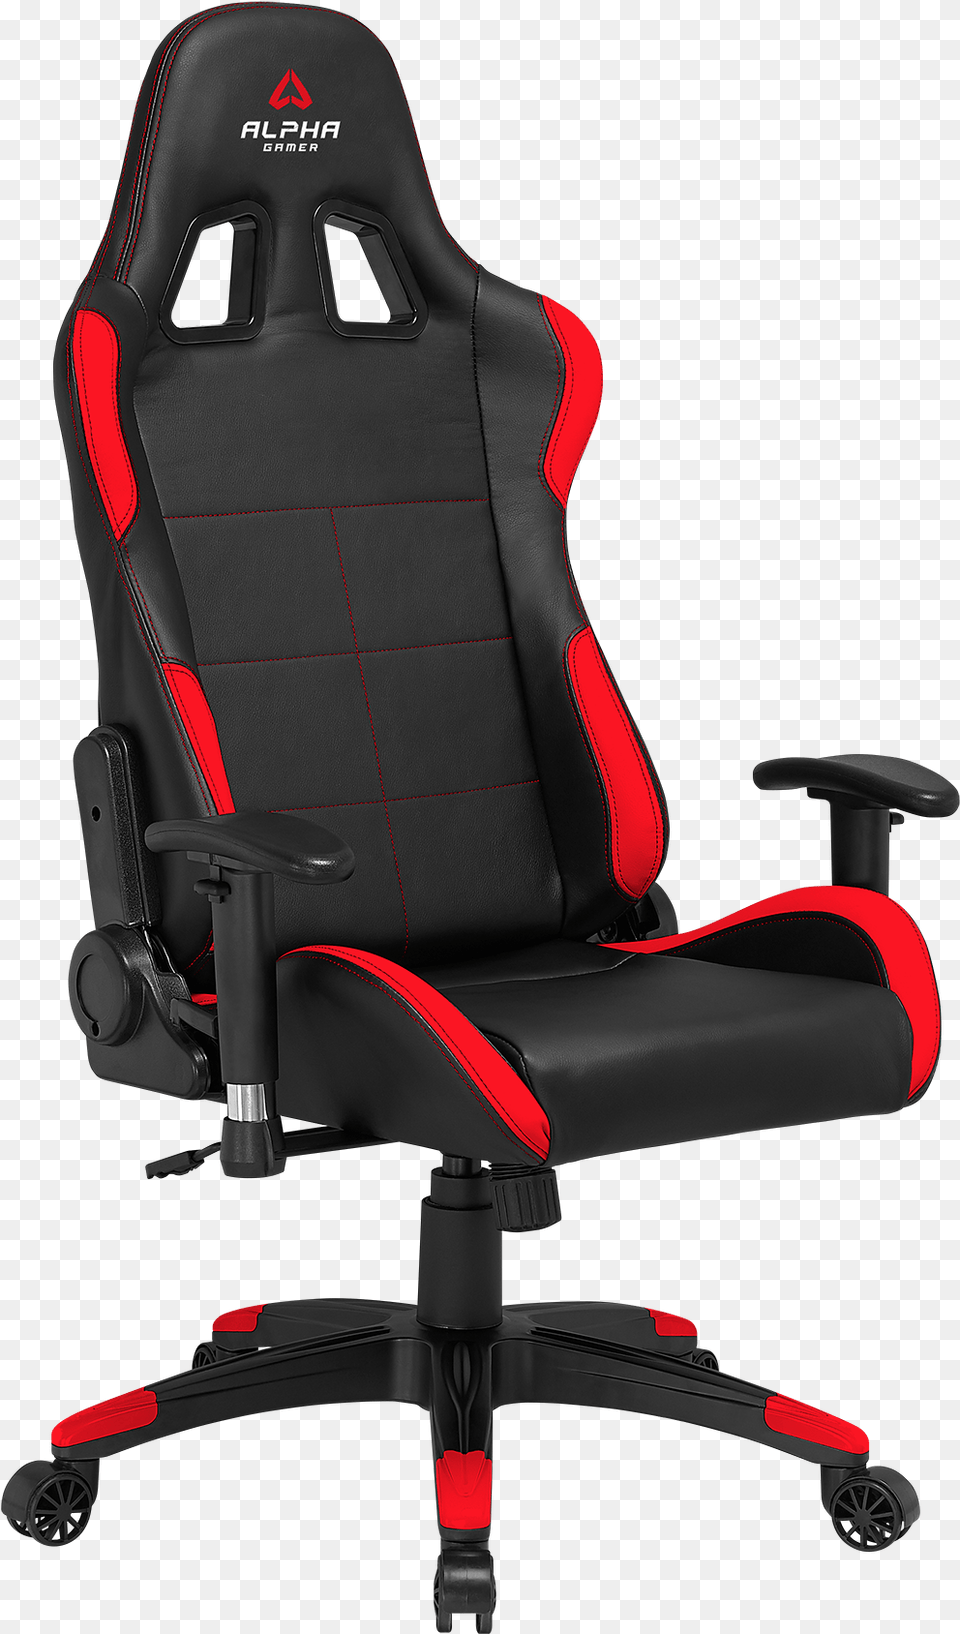 Buy Alpha Gamer Vega Gaming Chair Gaming Chair Alpha, Cushion, Home Decor, Furniture, Headrest Png Image